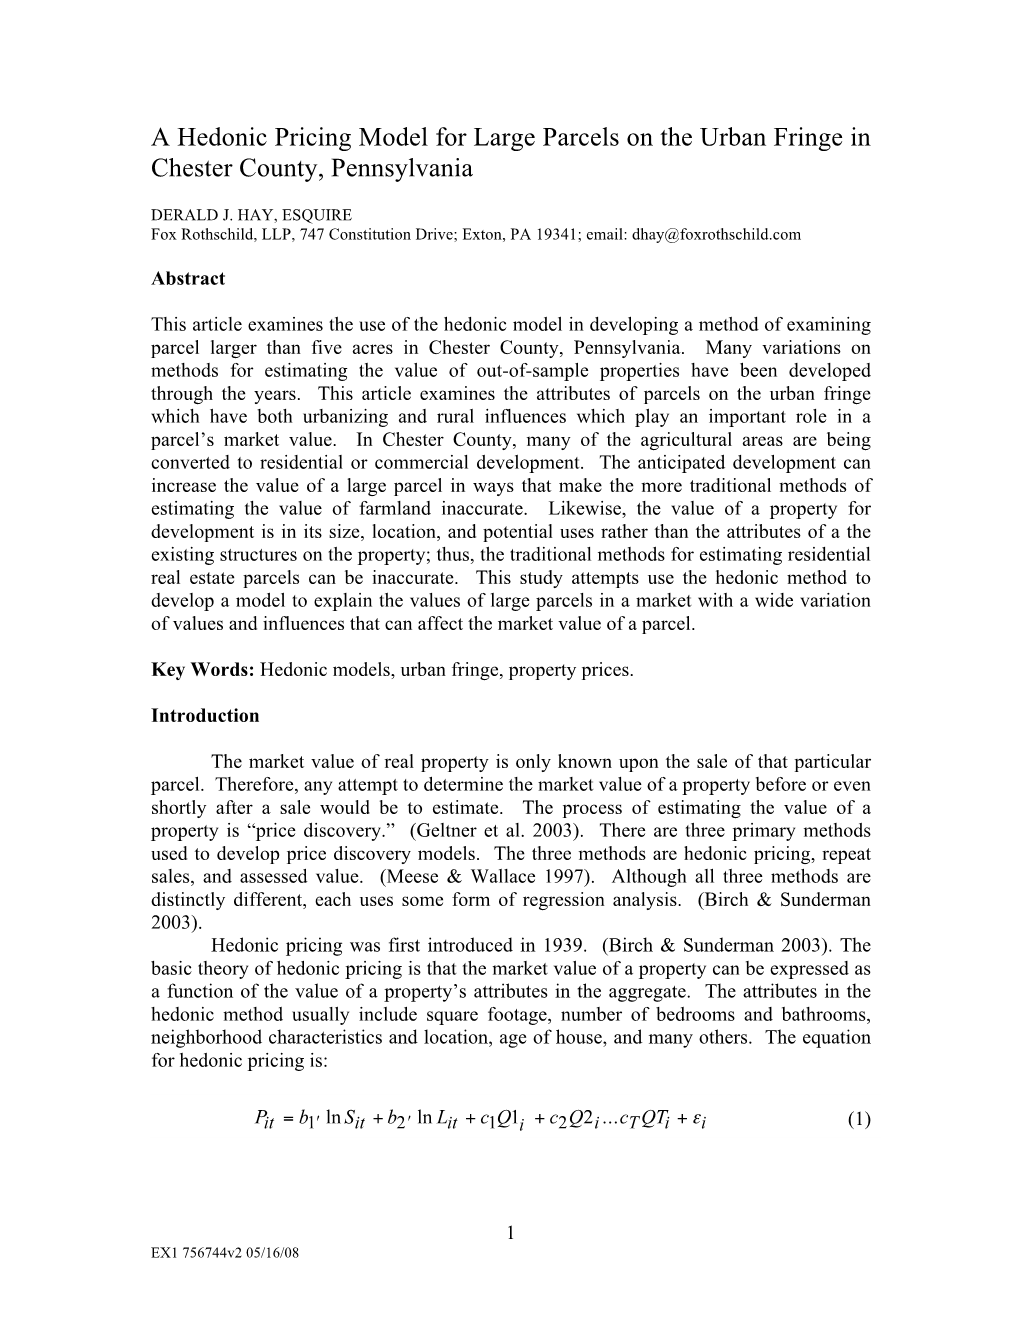 A Hedonic Pricing Model for Large Parcels on the Urban Fringe in Chester County, Pennsylvania